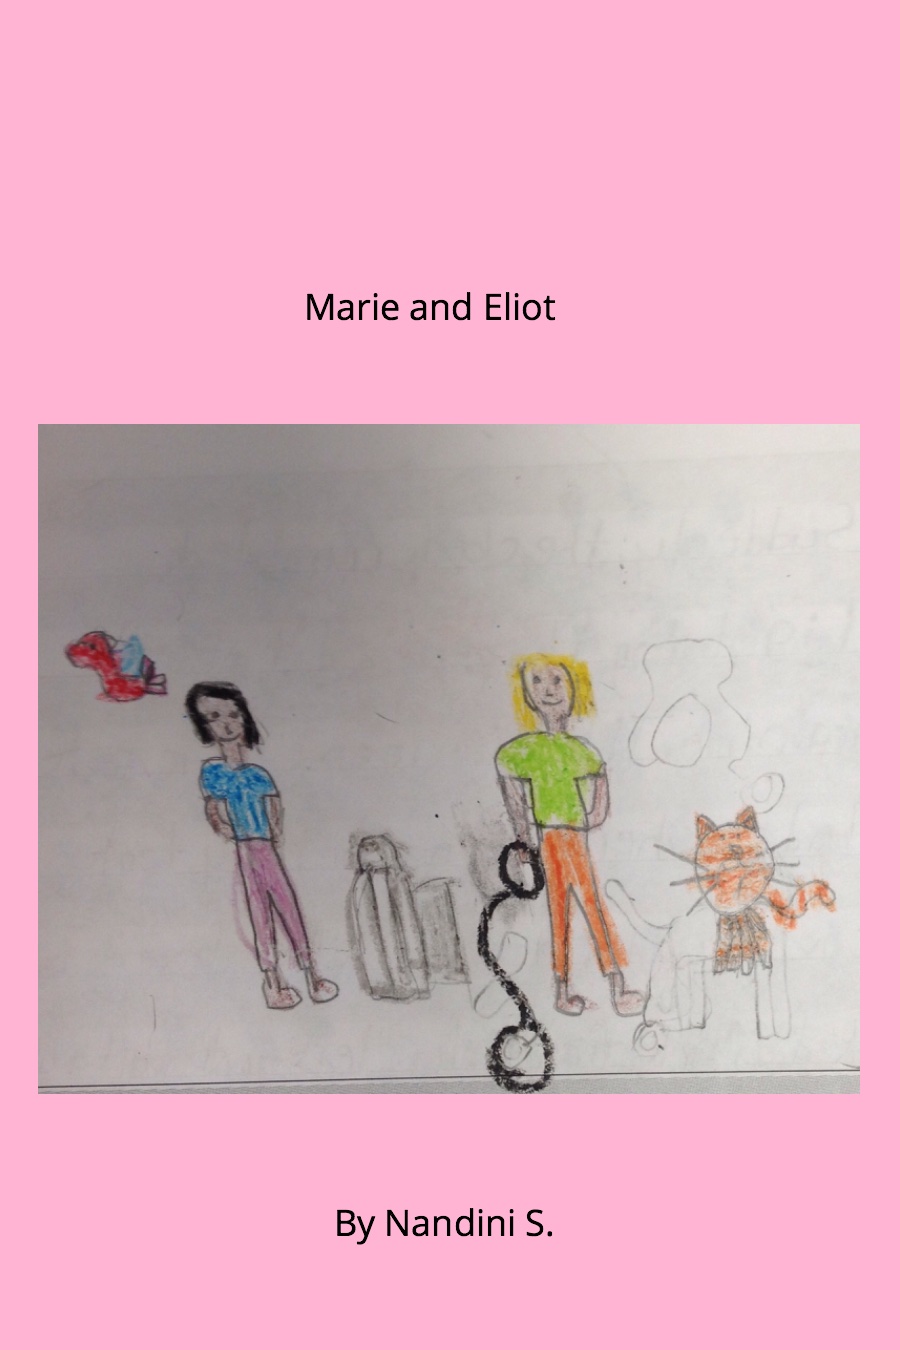 Marie and Eliot by Nandini S